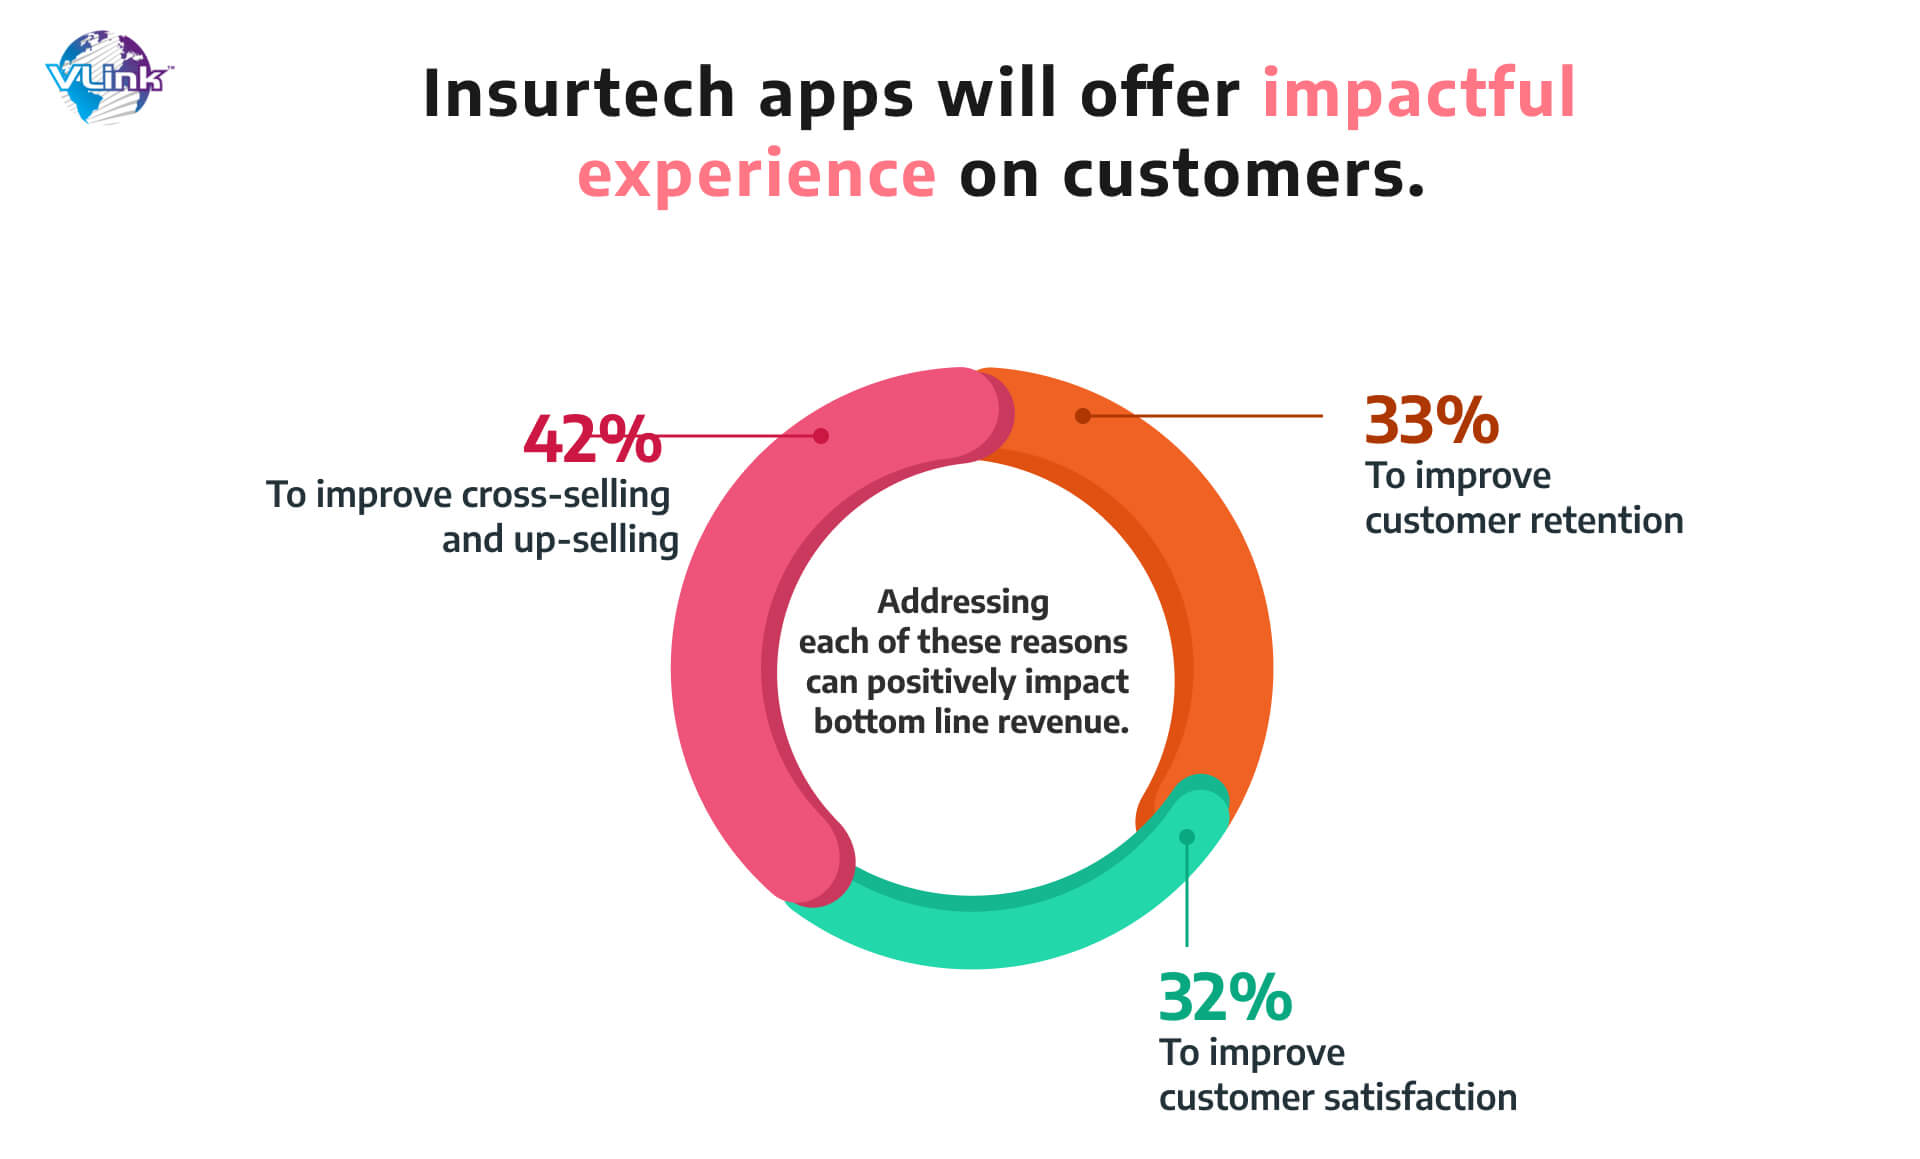 insurtech apps will offer impactful experience on costomers